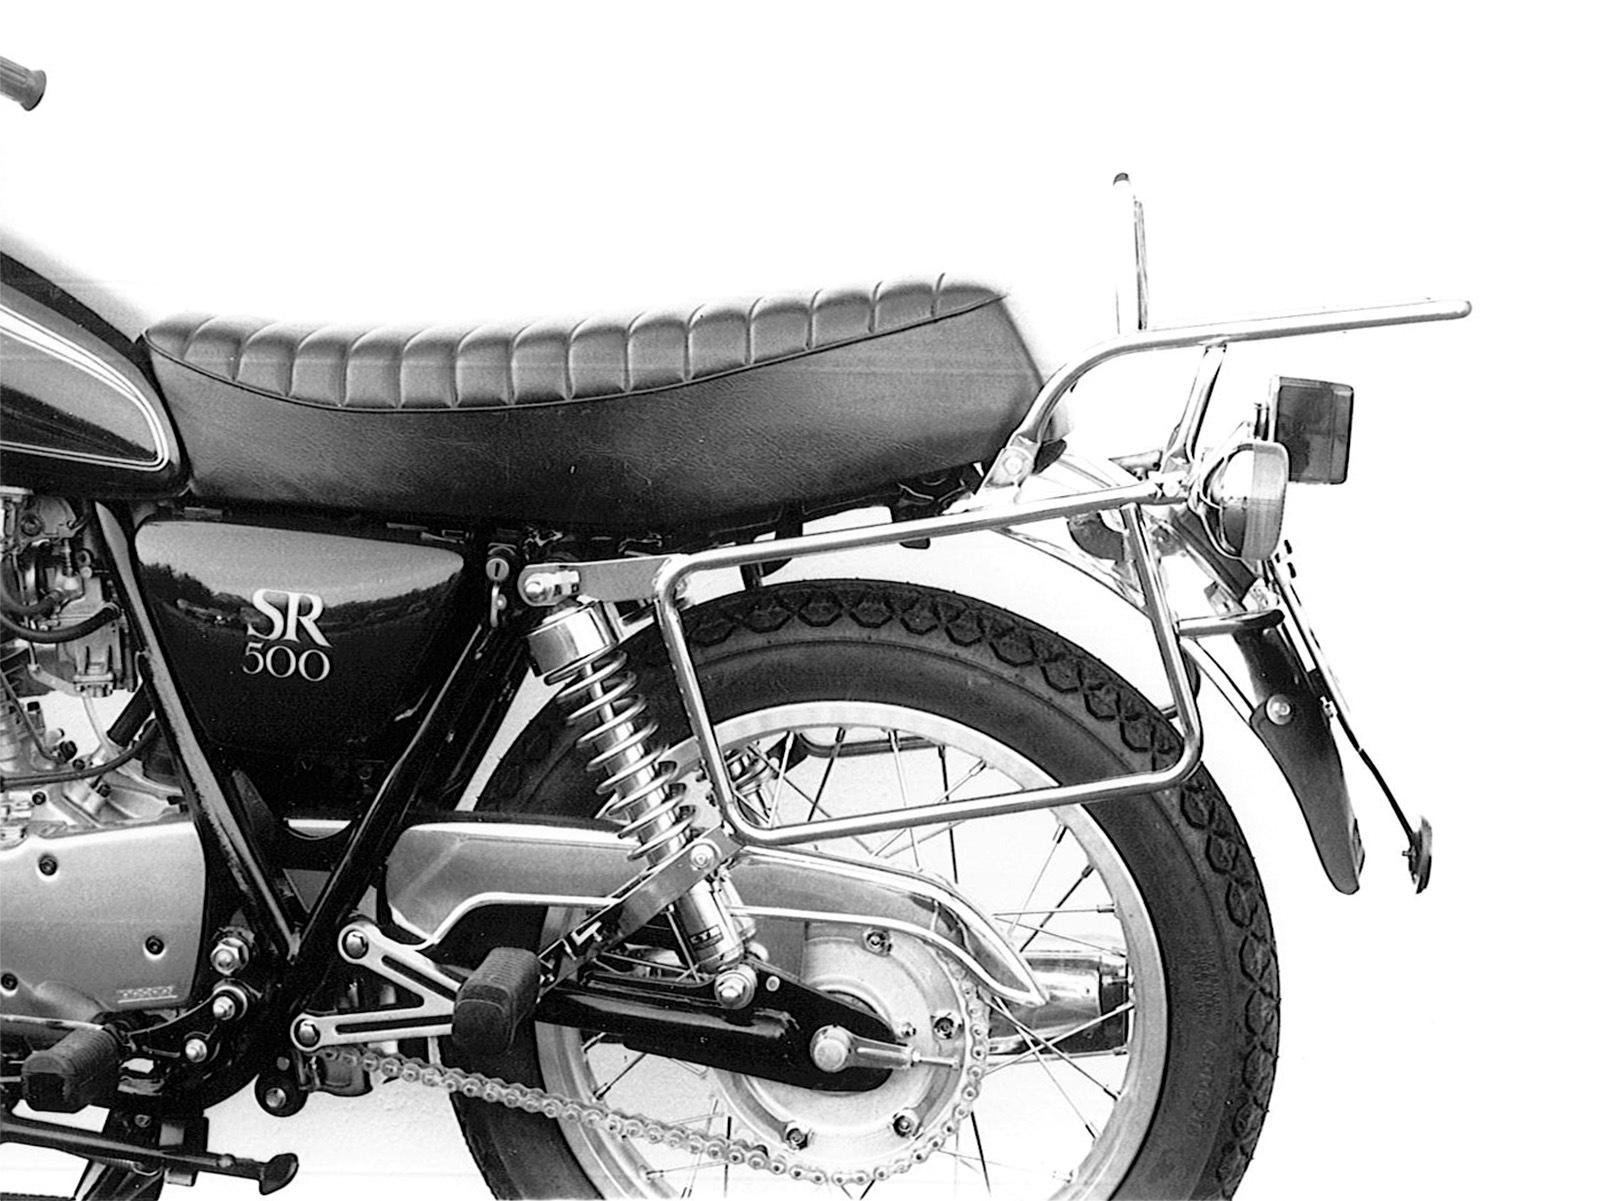 Complete carrier set (side- and topcase carrier) chrome for Yamaha SR 500 (1978-1998) (please tell year of production)